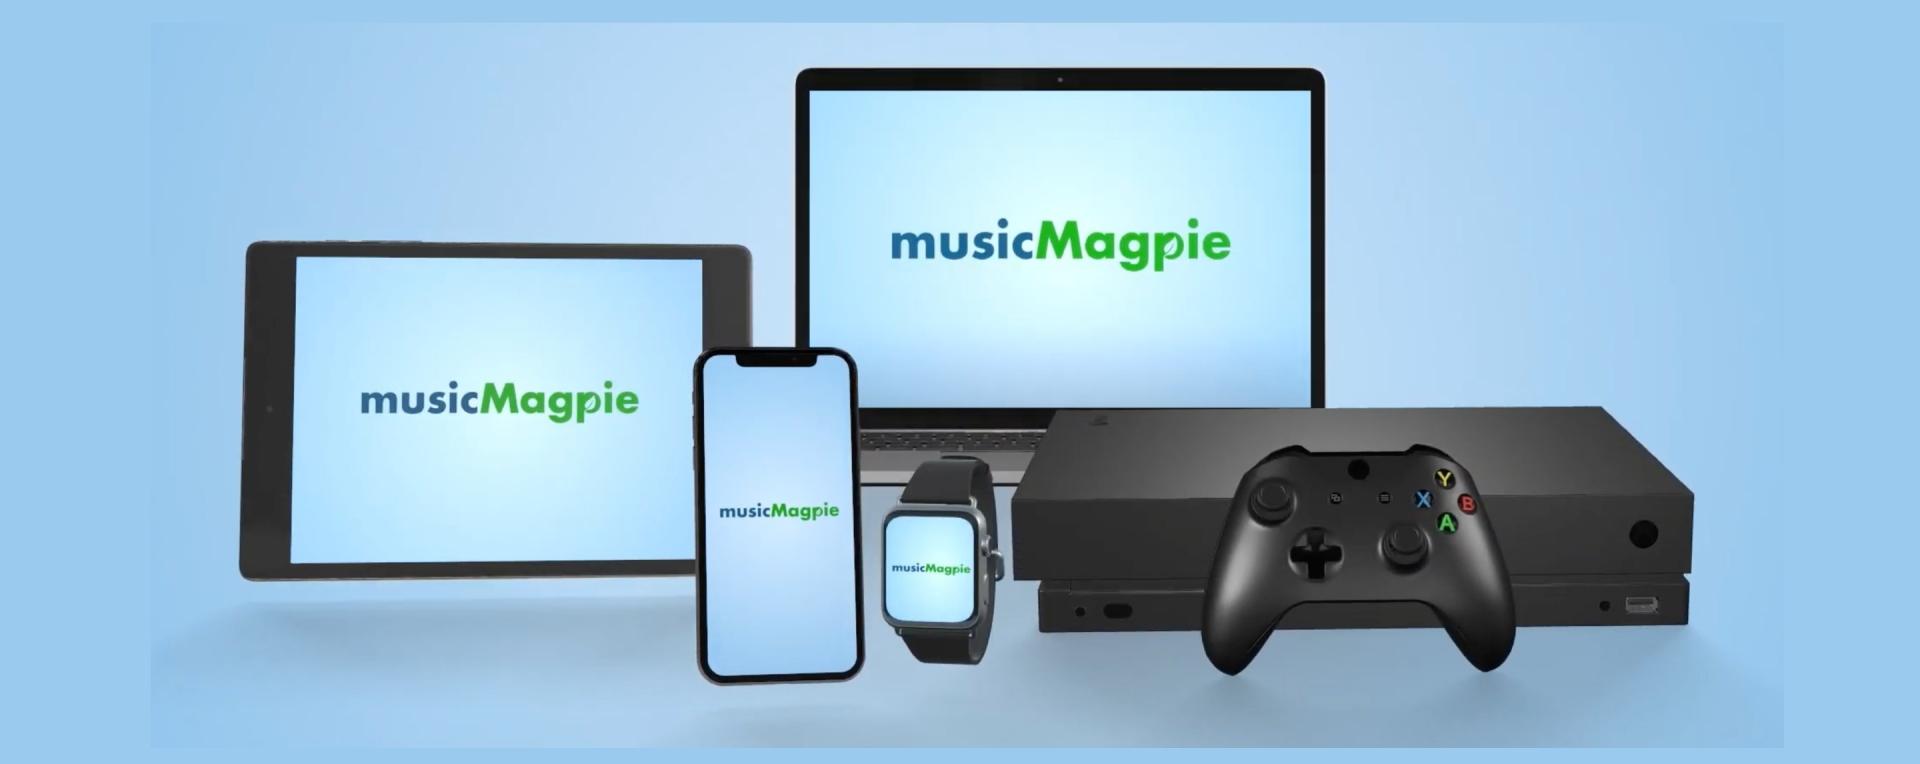 Get up to £100 off all Refurbished iMac & Macbook at Music Magpie